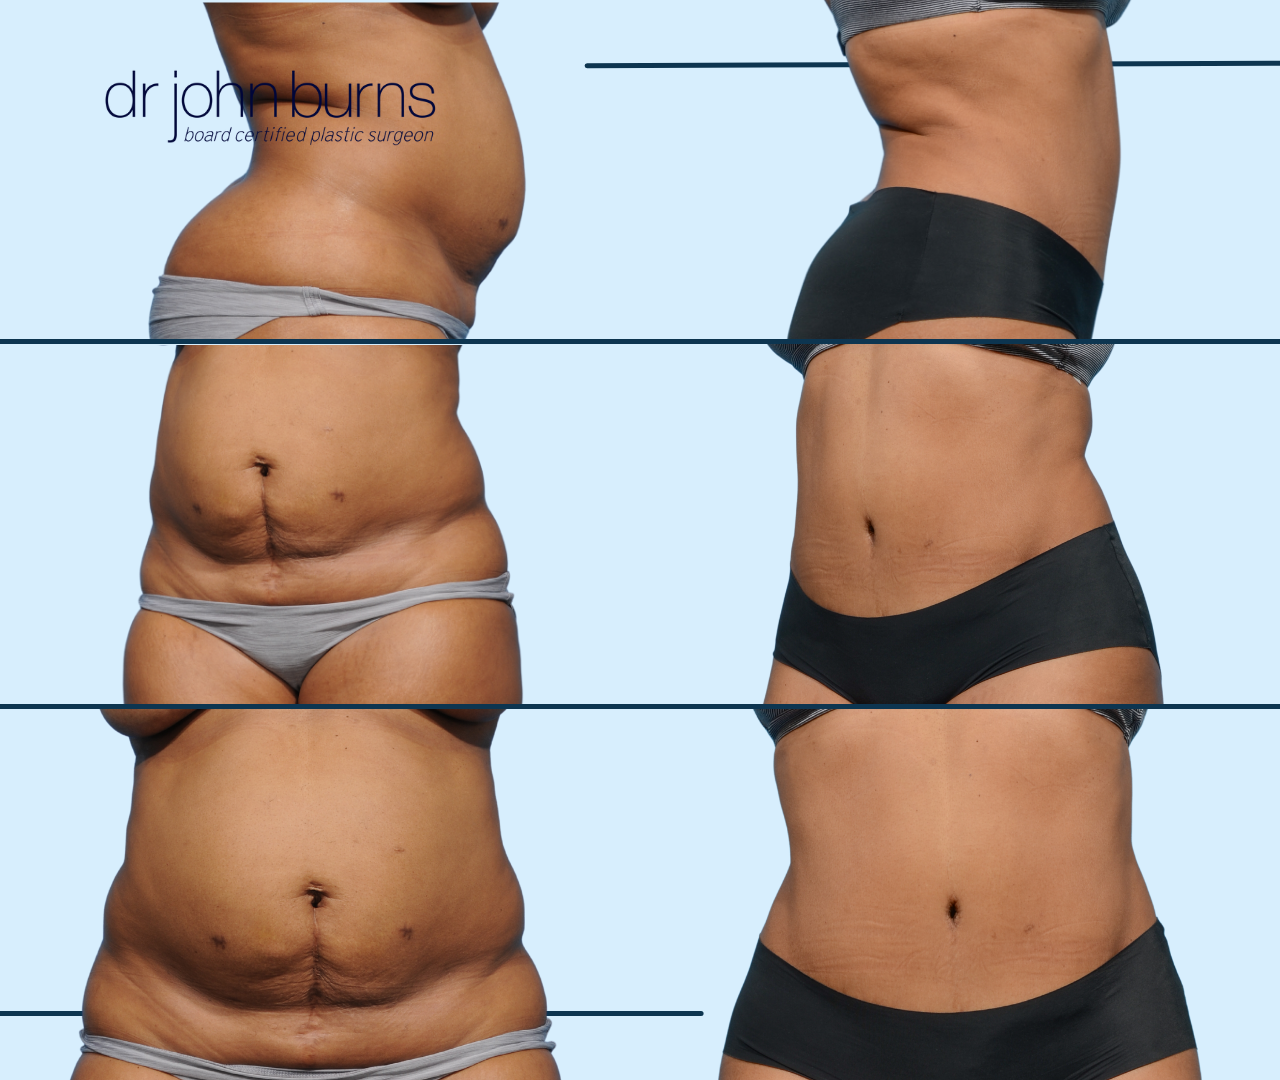 LIPOSUCTION OF THE MONS DURING A TUMMY TUCK - Hourglass Tummy Tuck